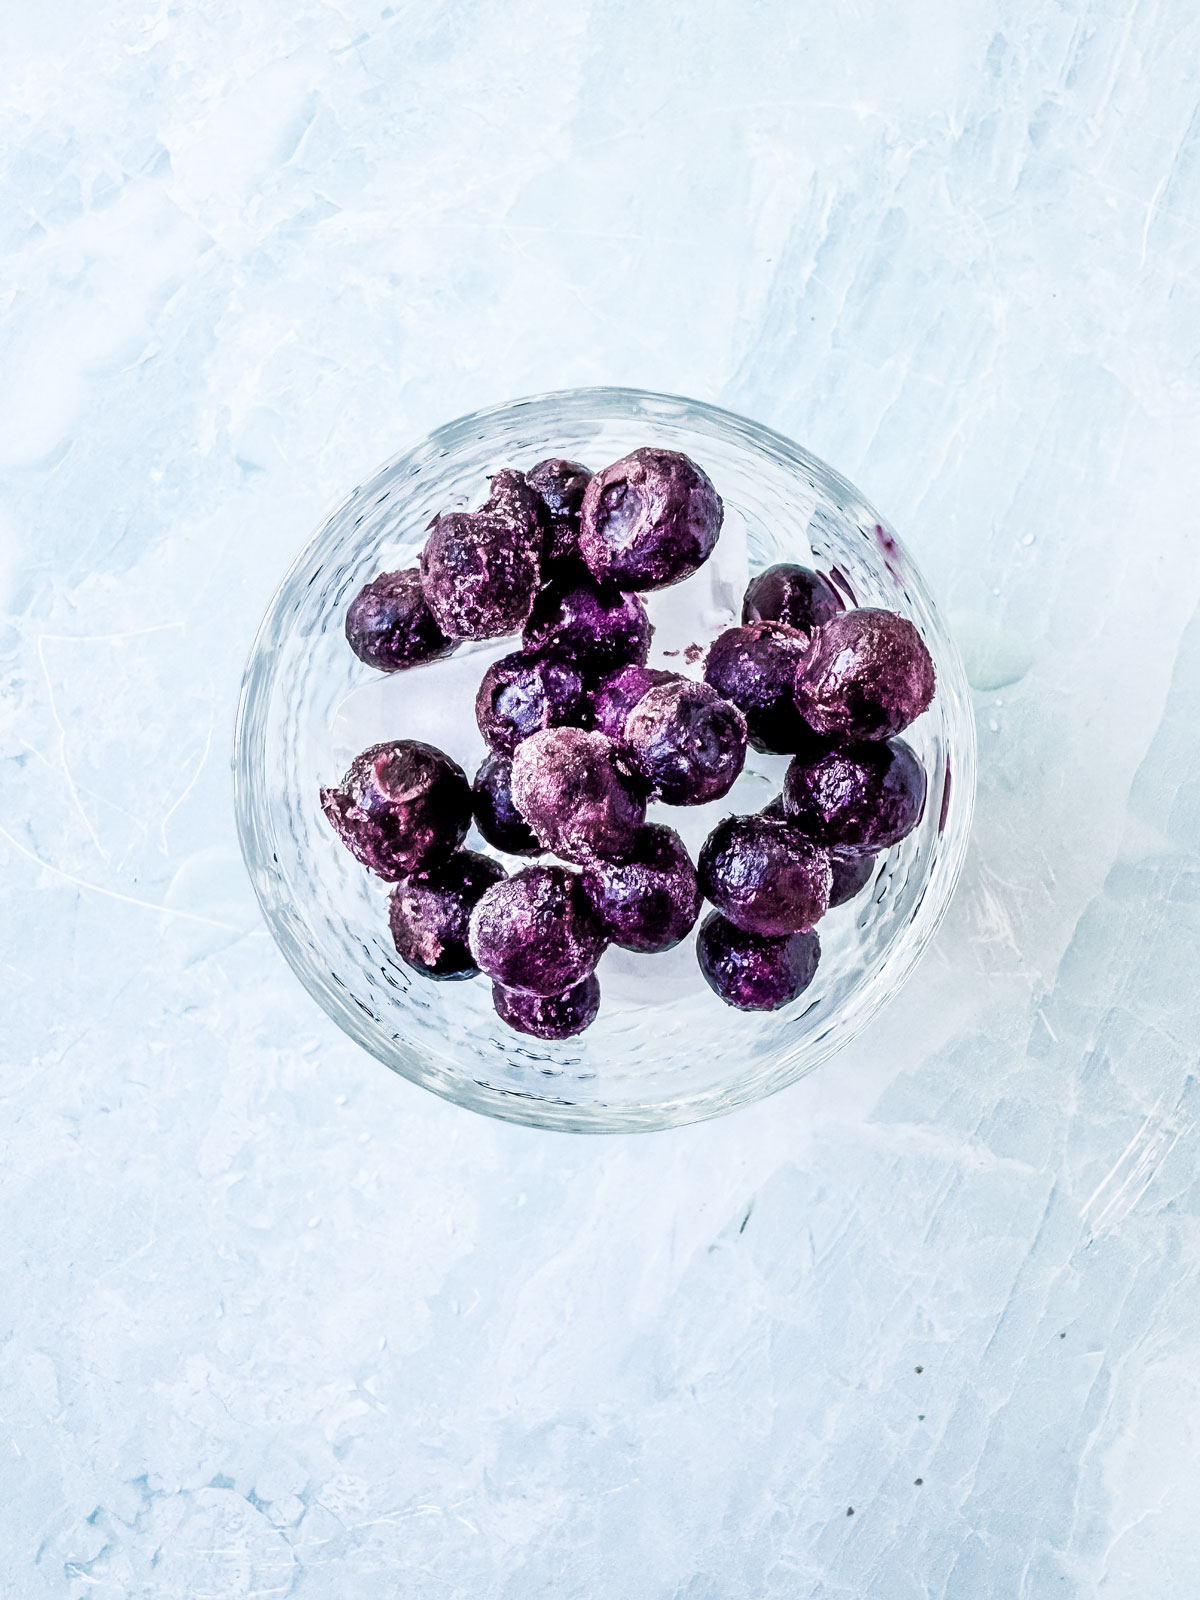 Frozen blueberries added to glass of ice.